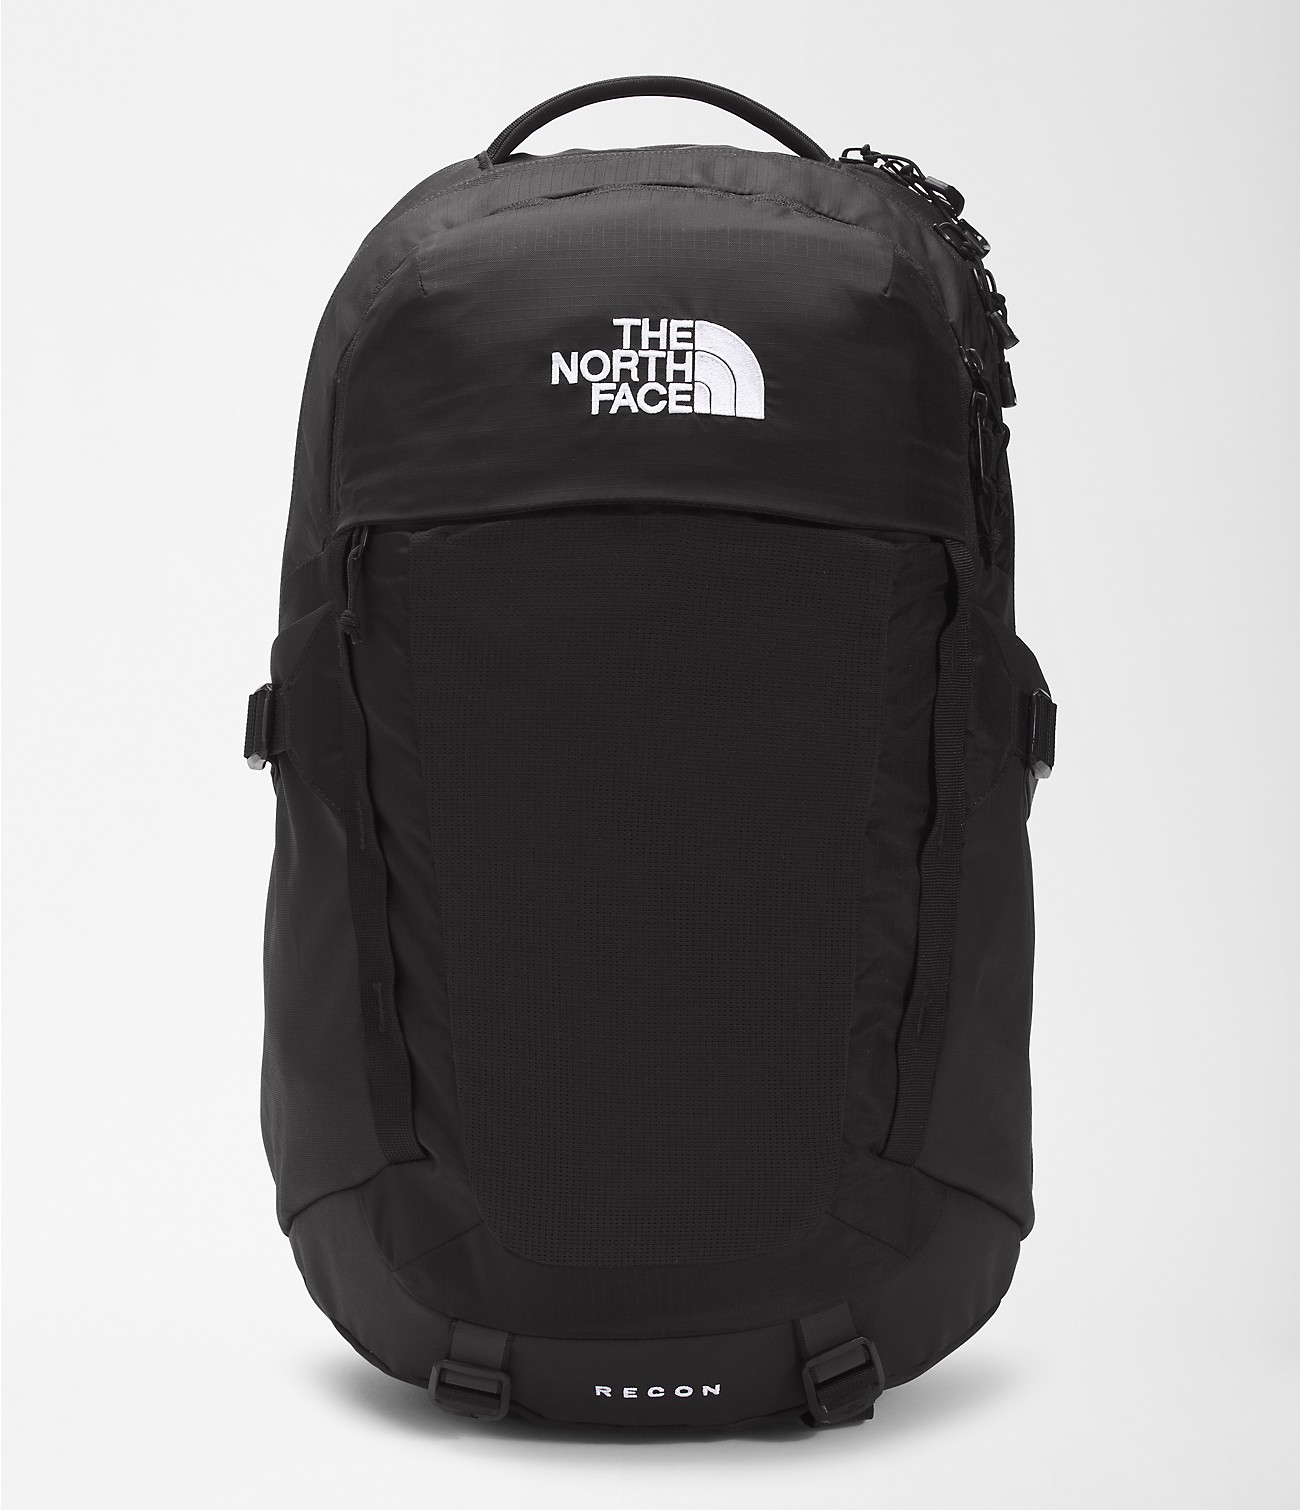 Unlock Wilderness' choice in the North Face Vs JanSport comparison, the Recon Backpack by The North Face